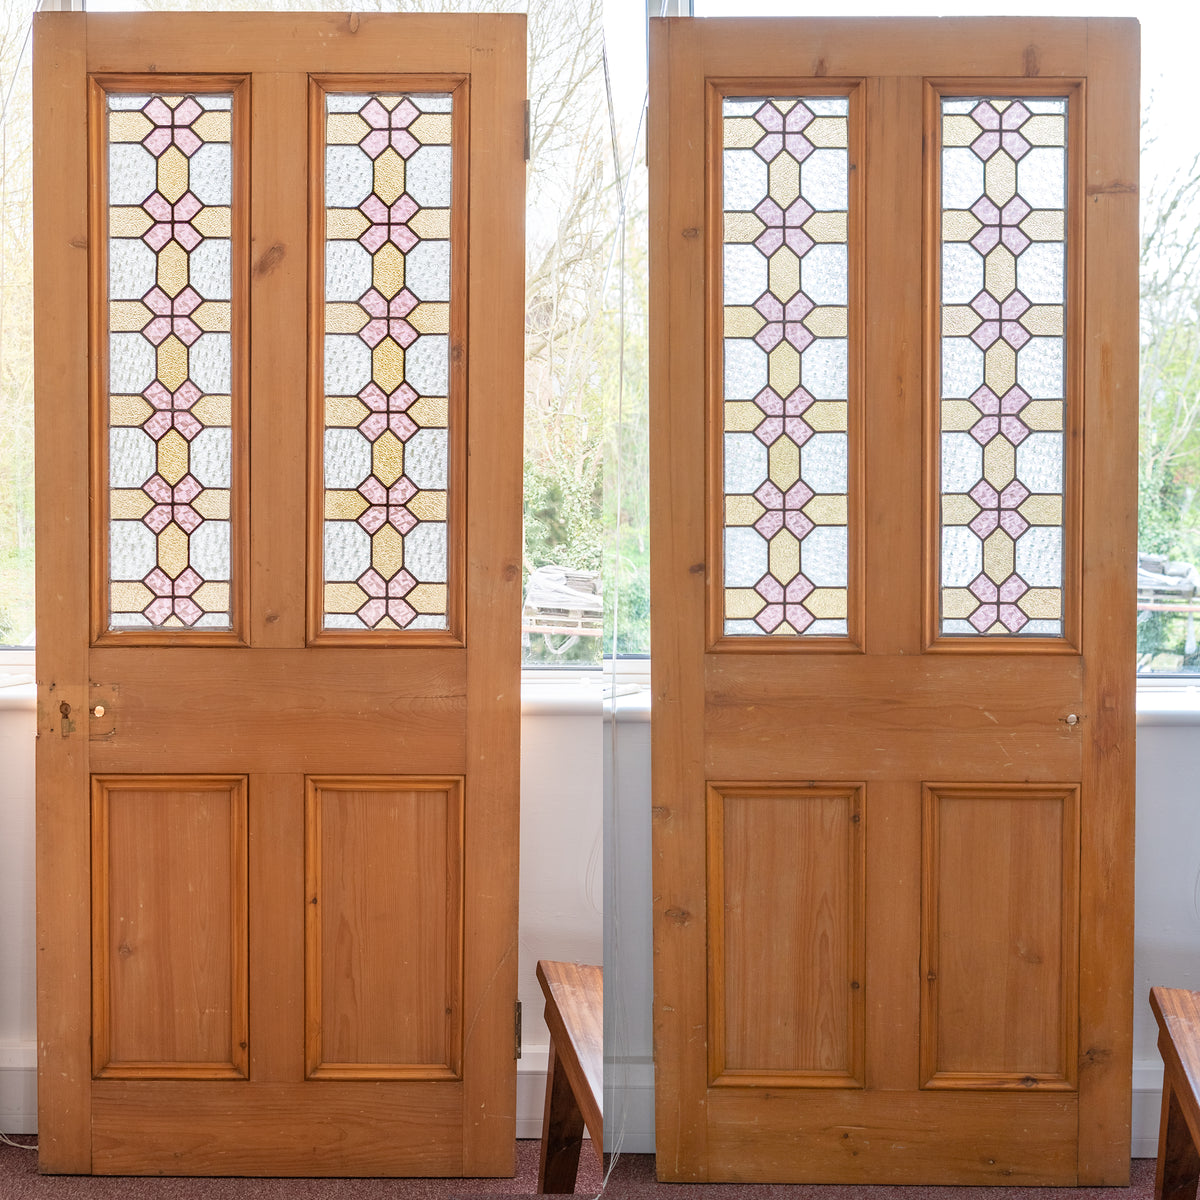 Antique Victorian Stained Glass Door - 203cm x 84cm | The Architectural Forum